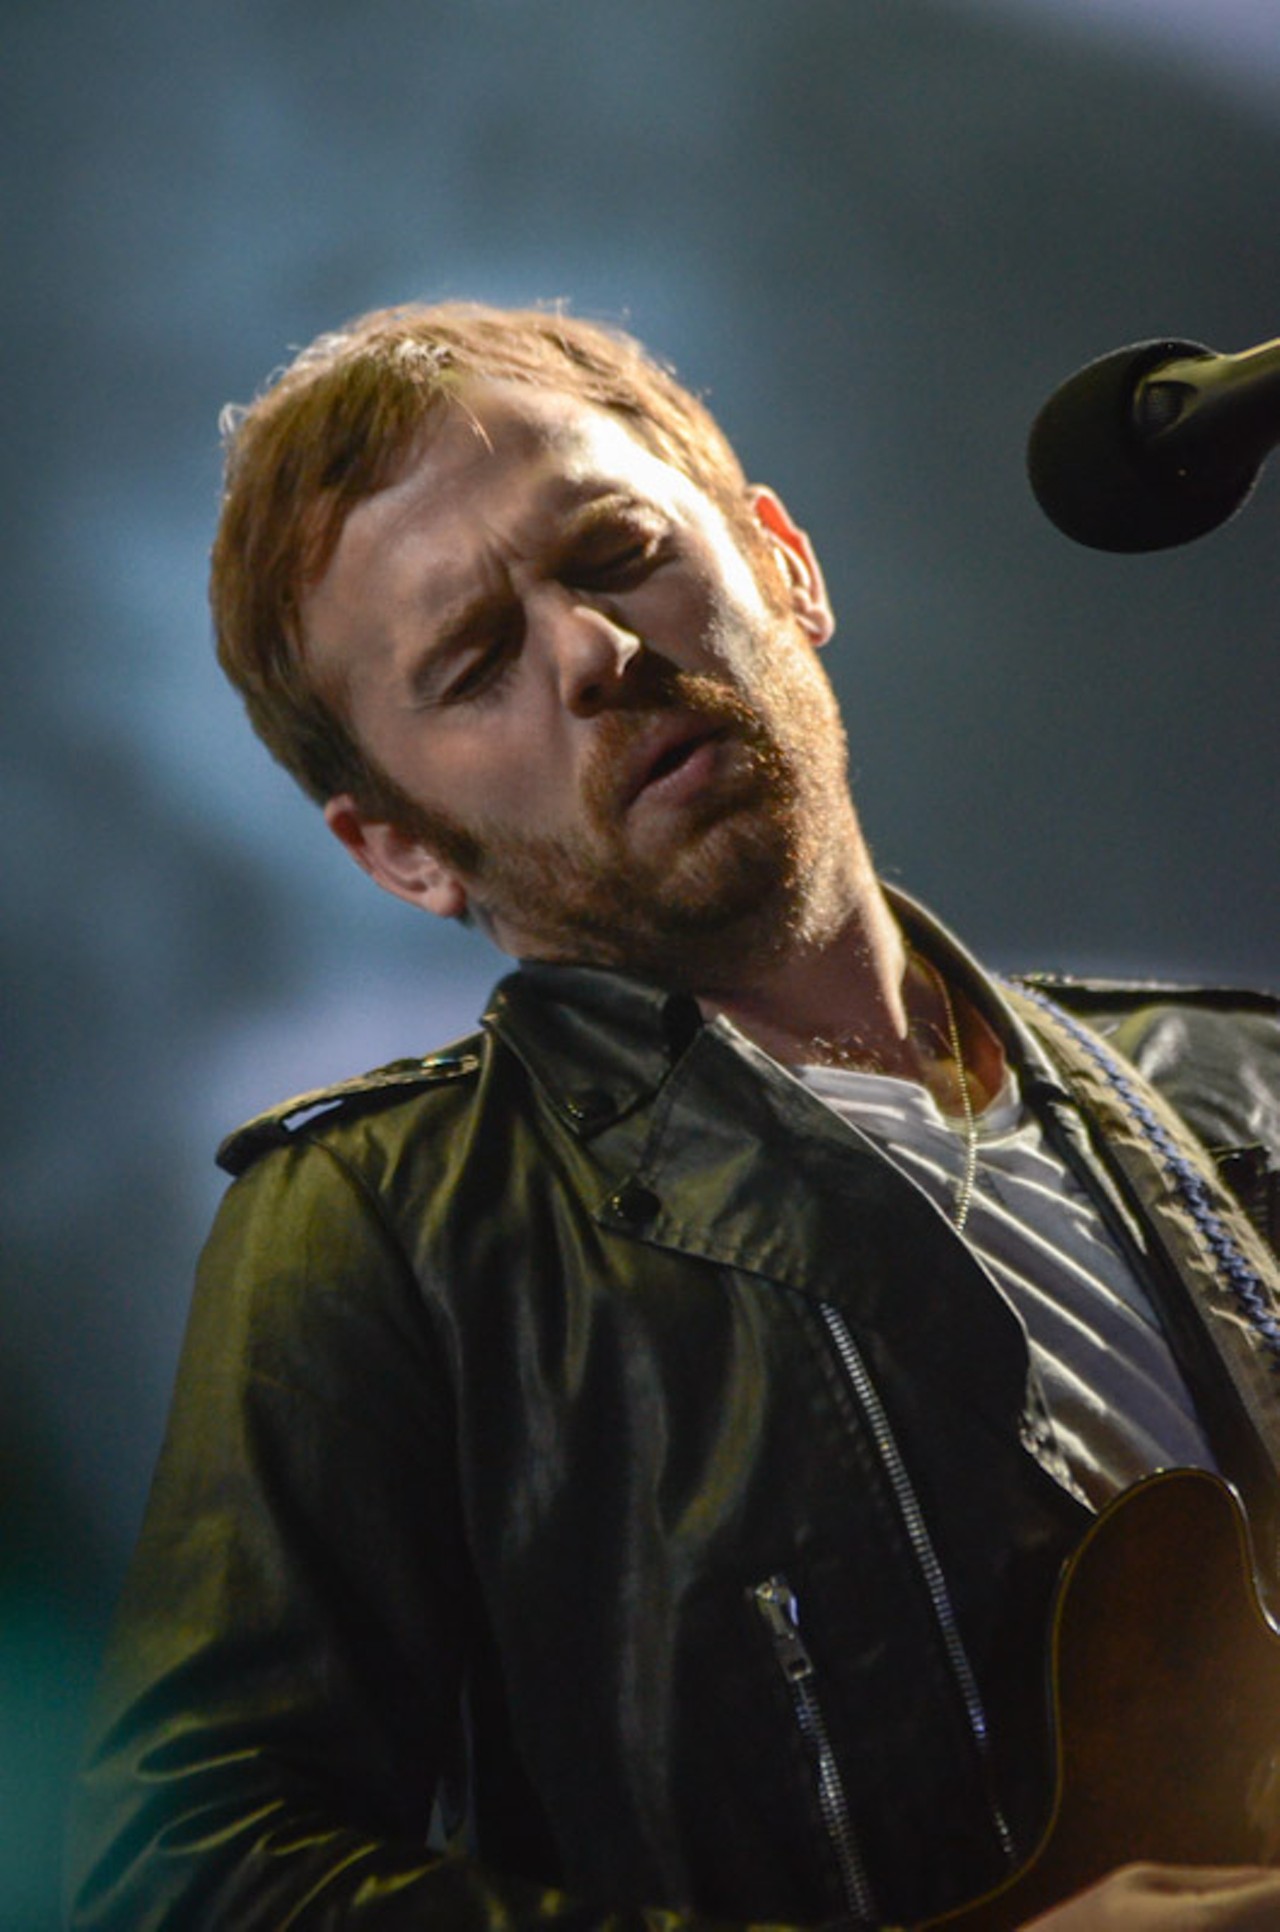 33 Great Pics From Kings Of Leon at the Palace